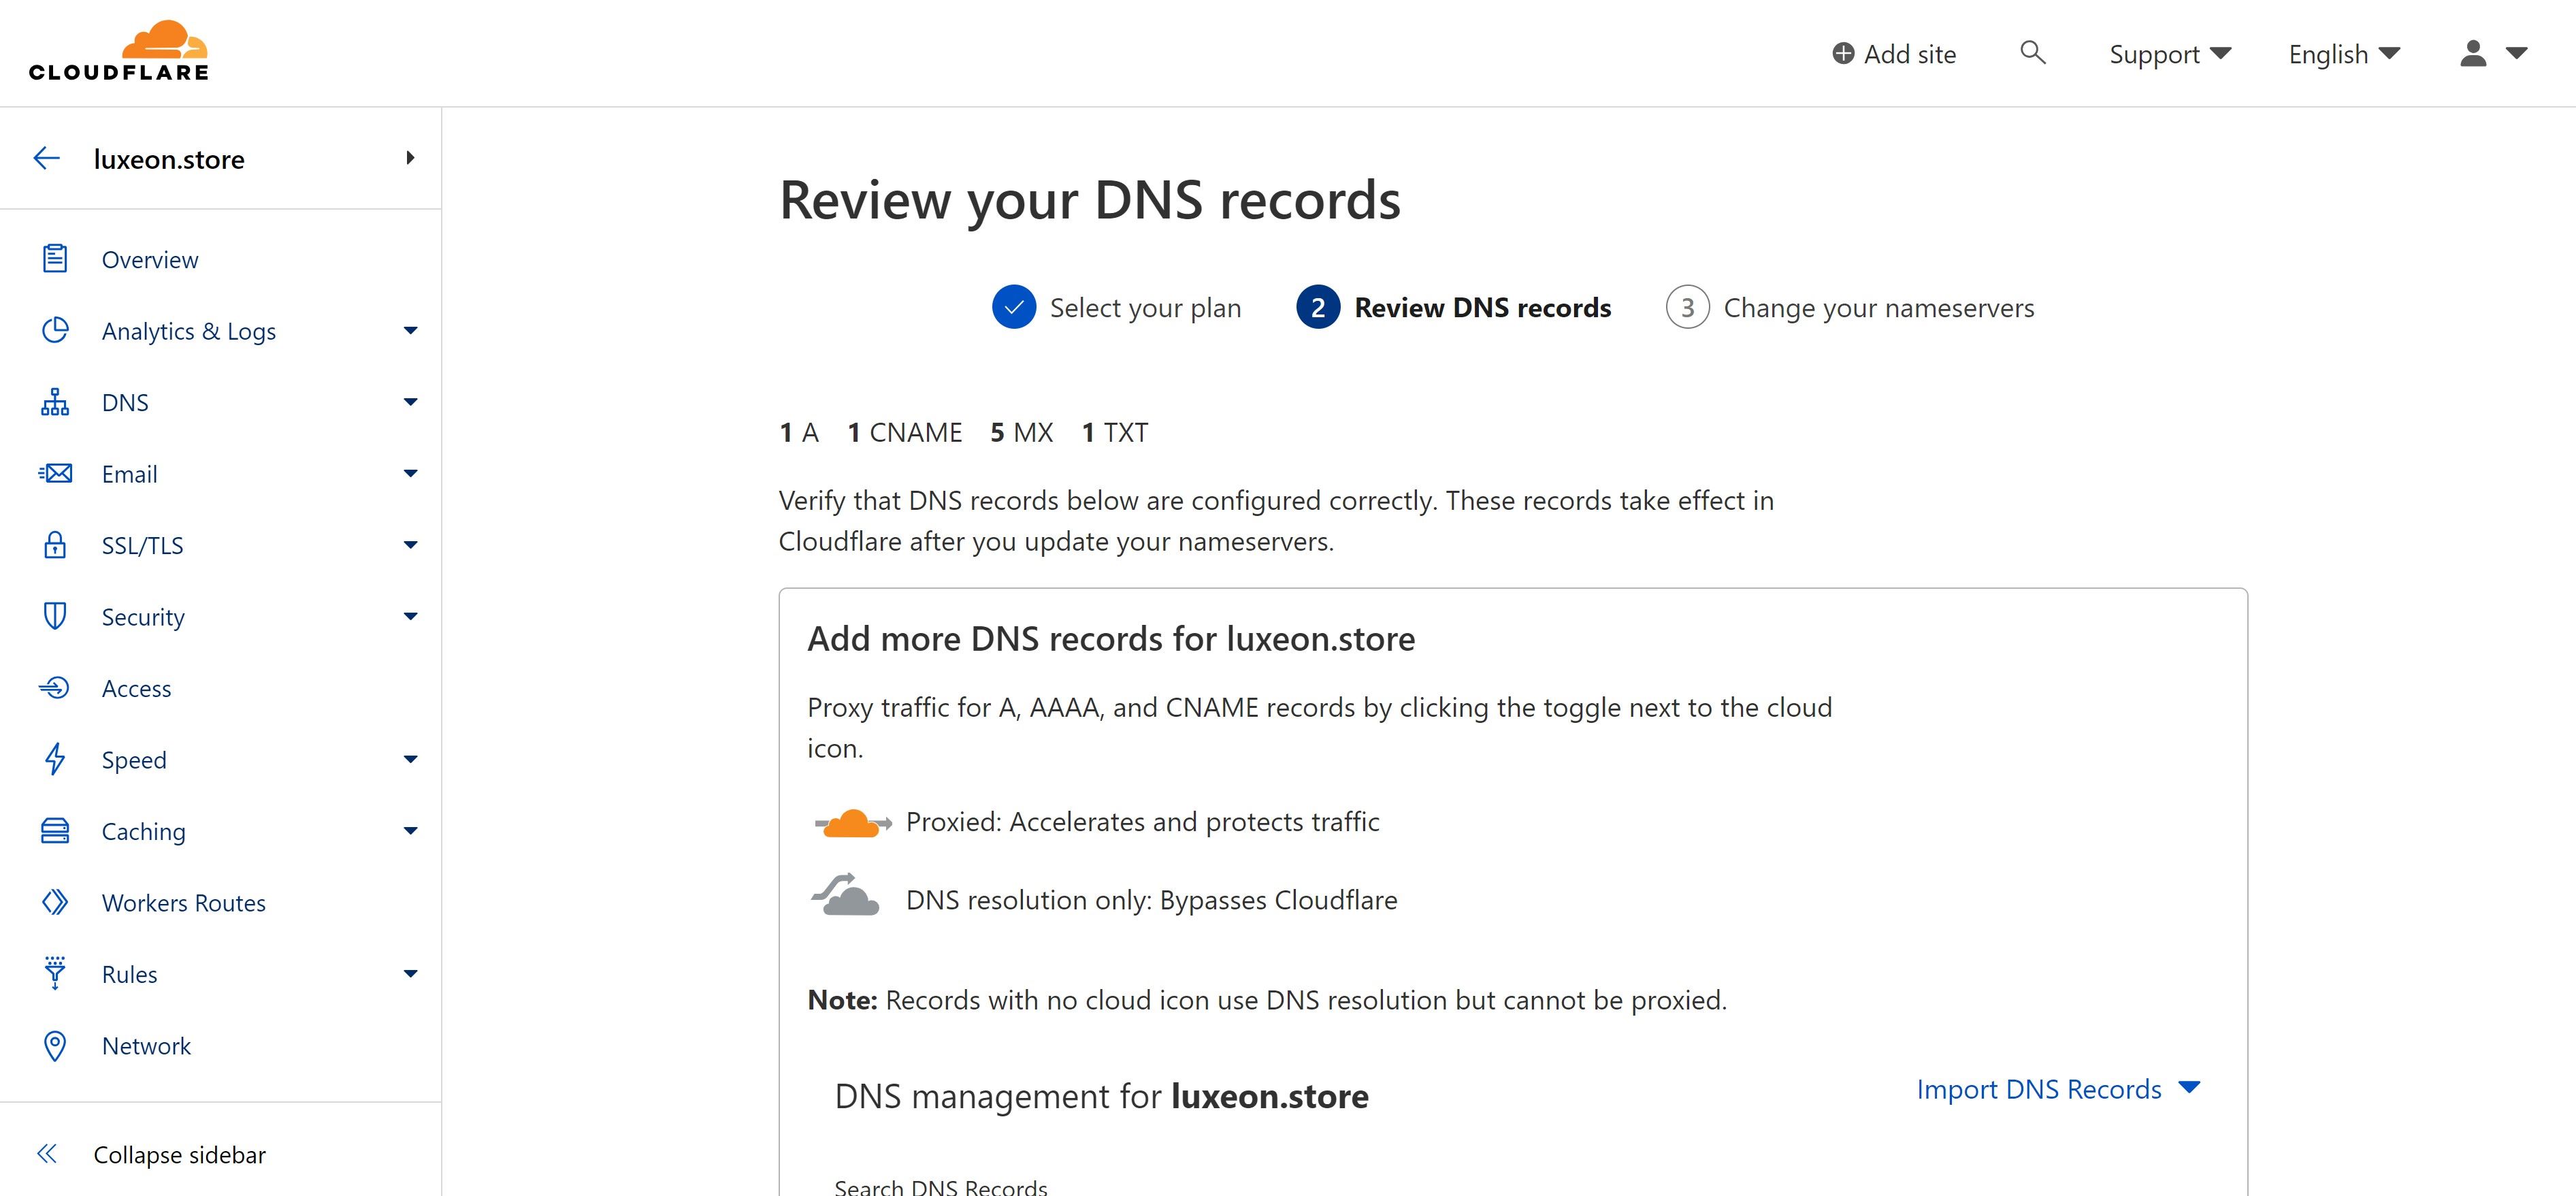 Configuring DNS Settings for Shopify Within Cloudflare